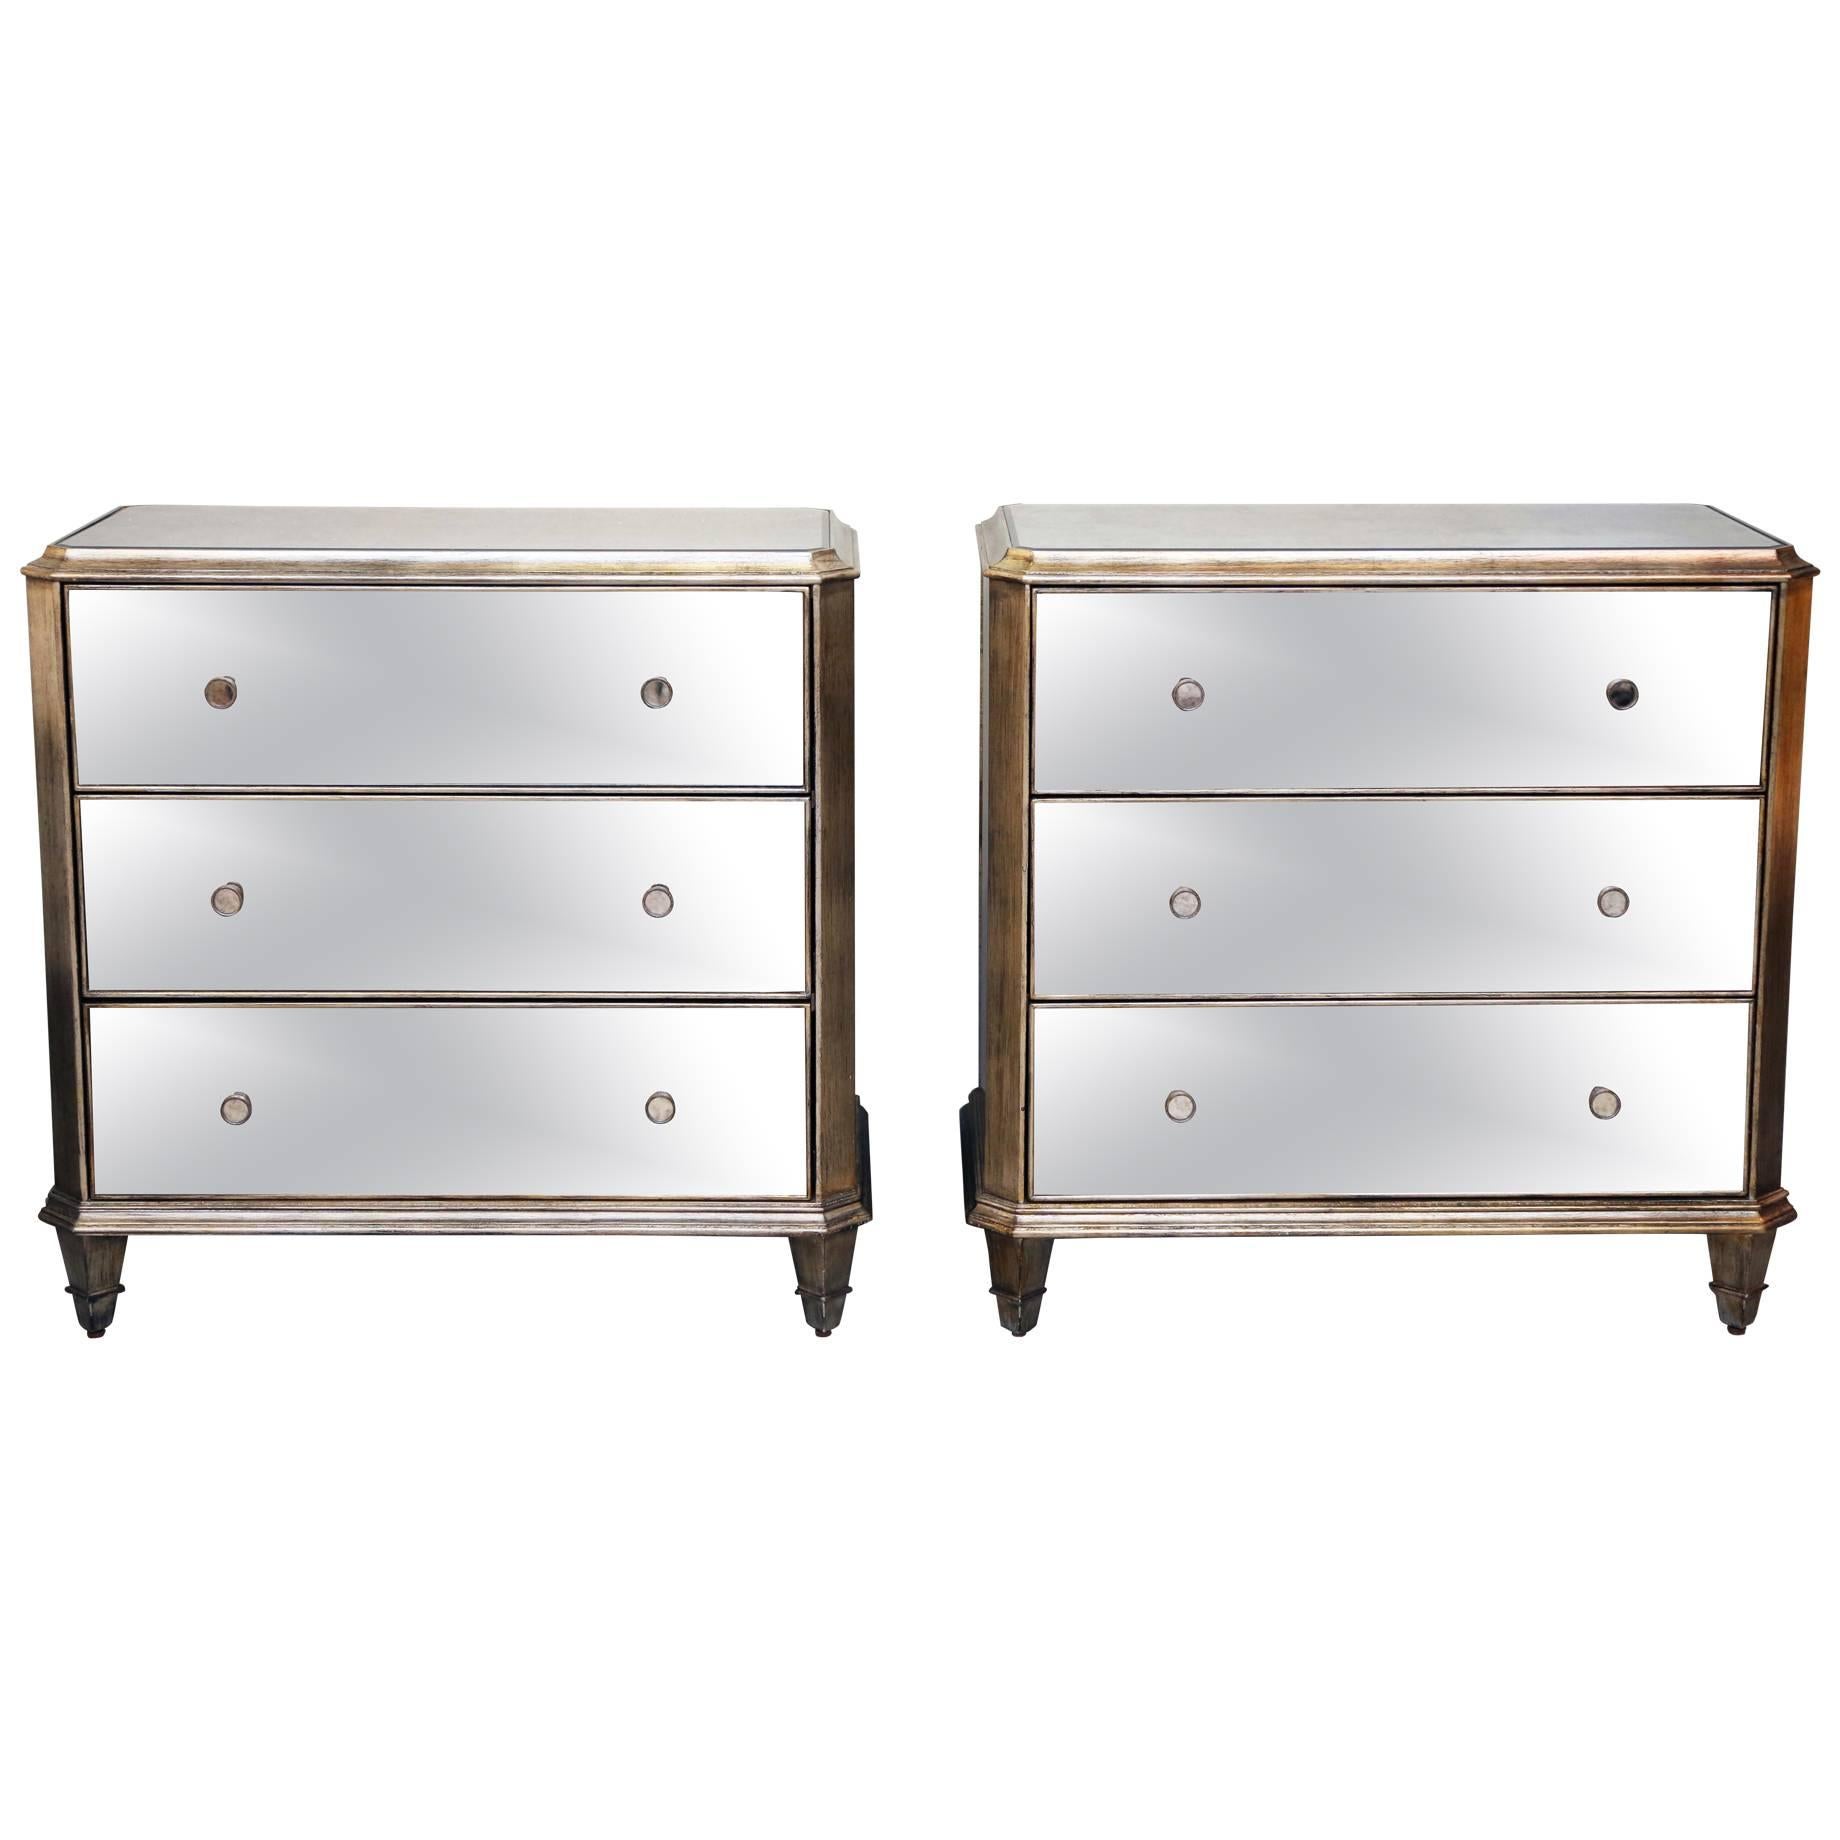 Vintage, Pair of Mirrored Dressers, Silver Finish, Mirrored on Three Sides